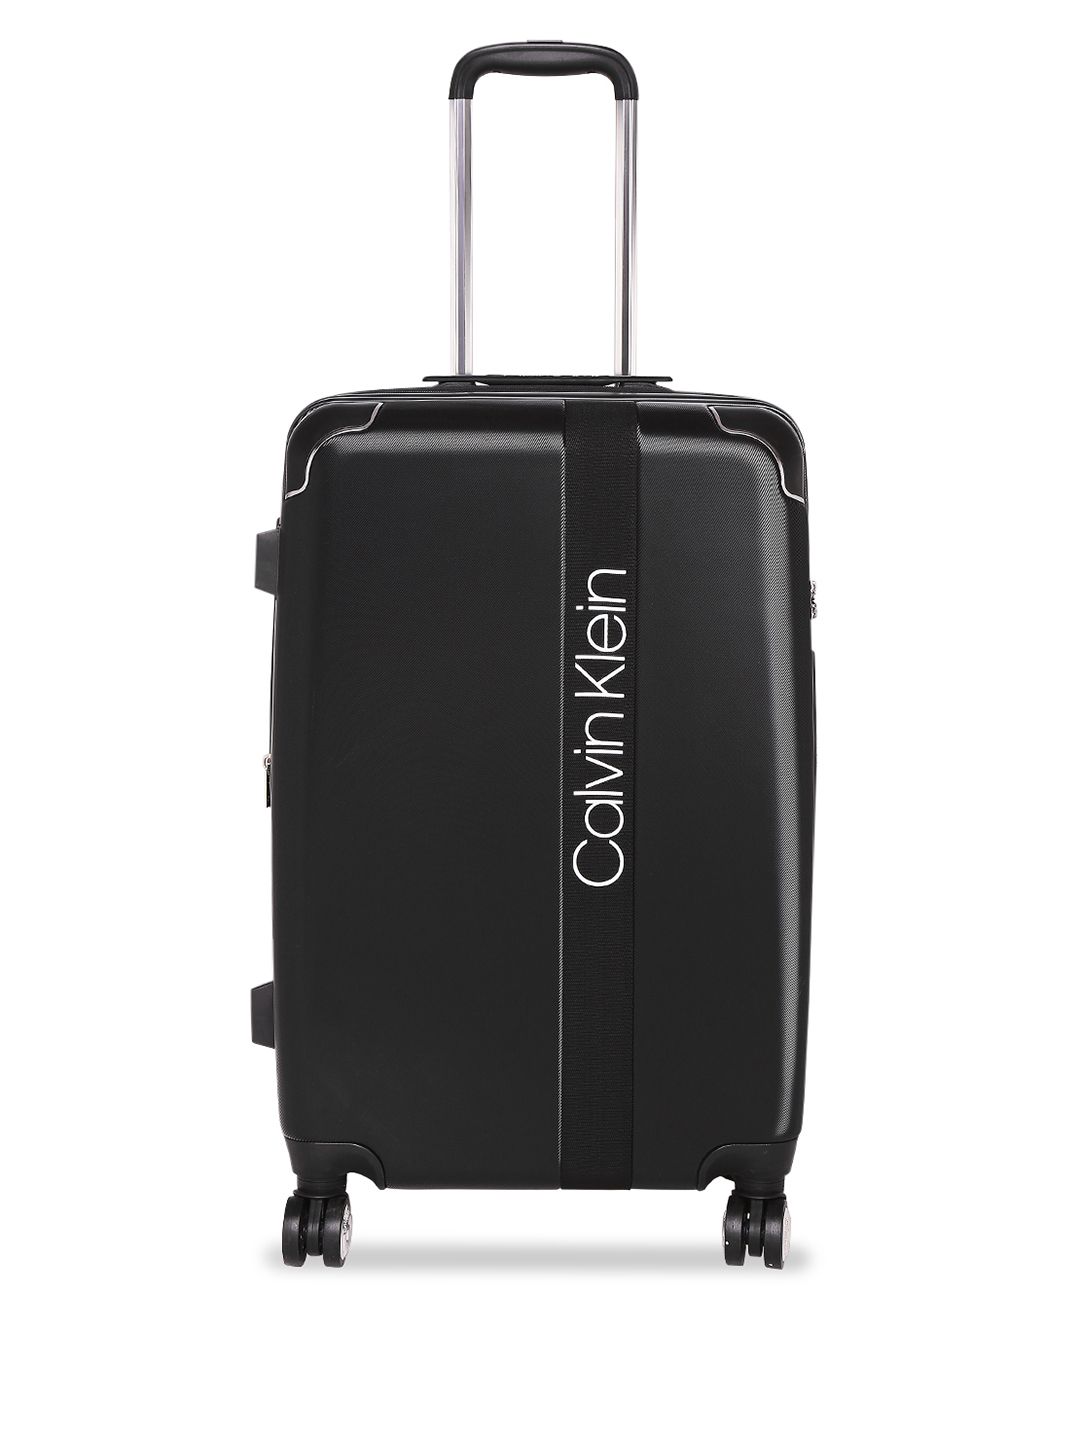 Calvin Klein Black Solid Madison Ave HS Hard-Sided Large Trolley Suitcase Price in India